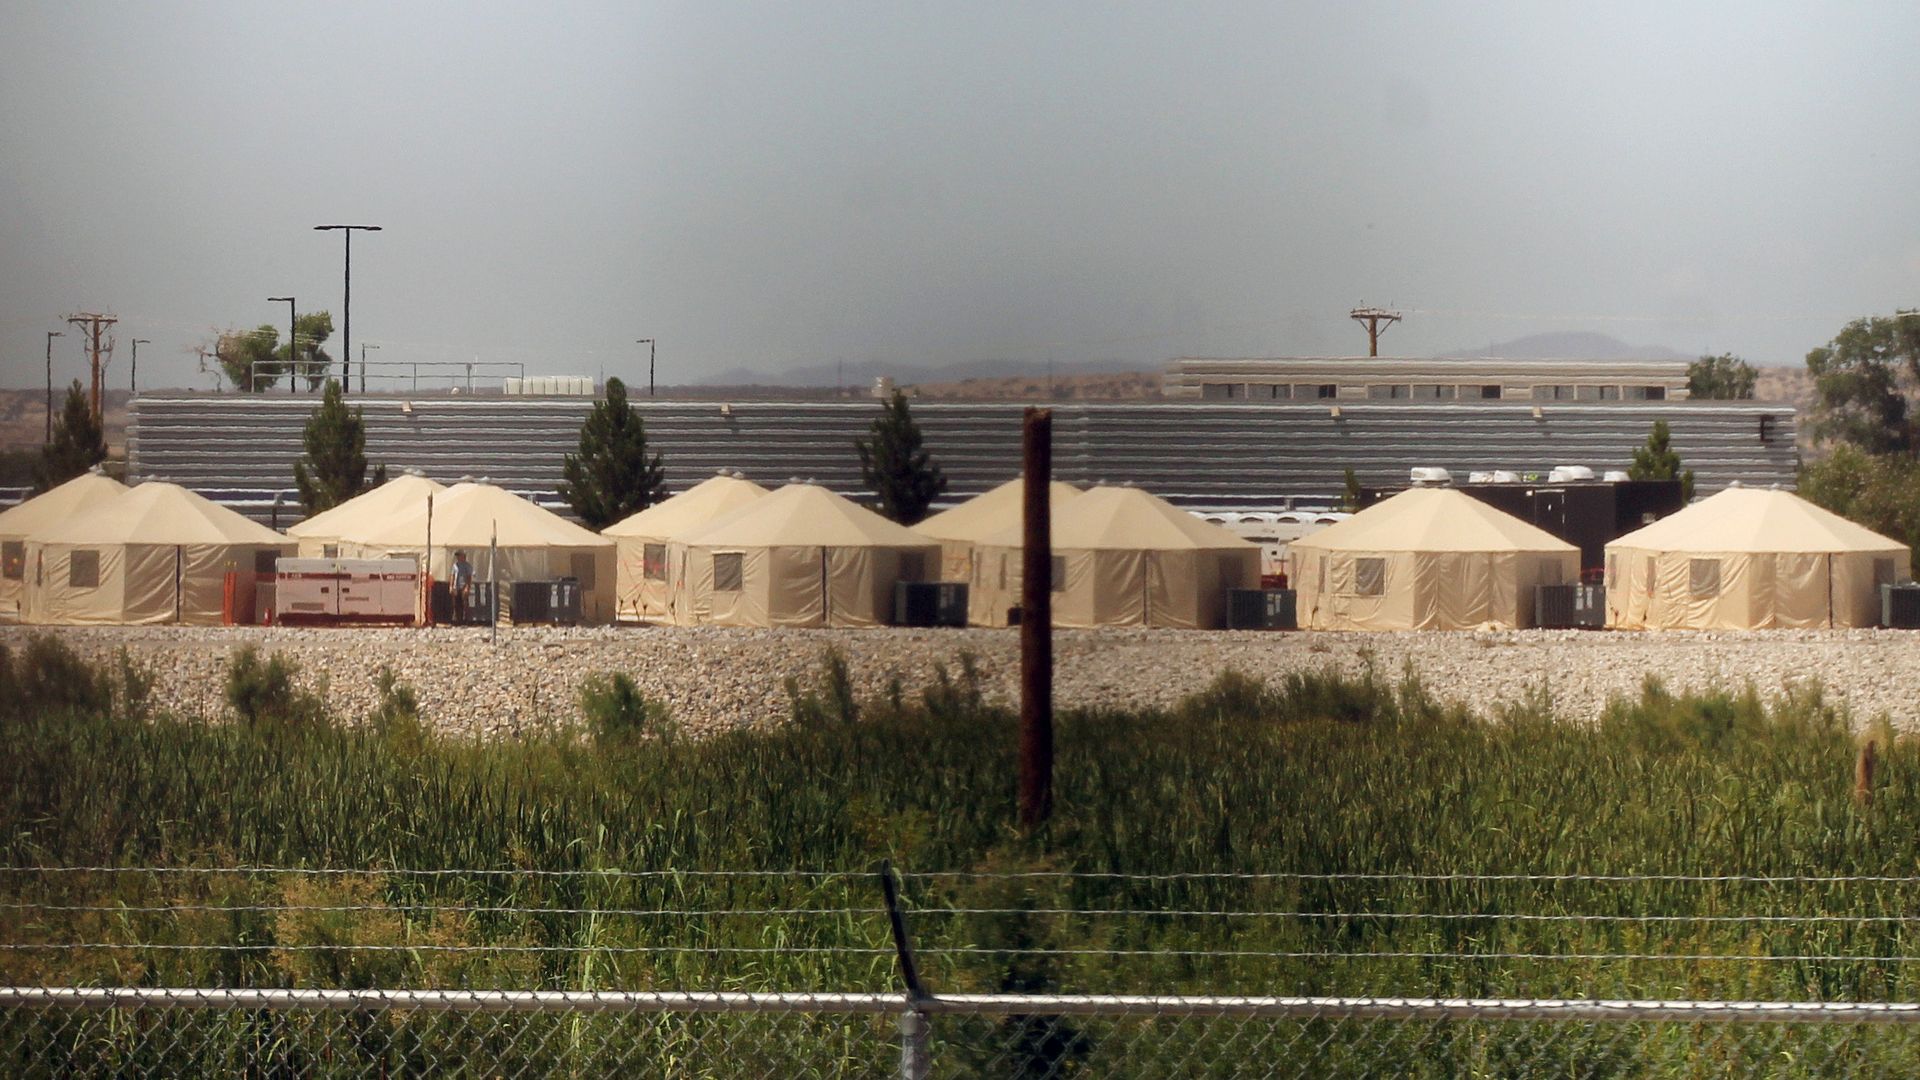 Tents set up behind a barbed wire fence that are used for detaining immigrants. 